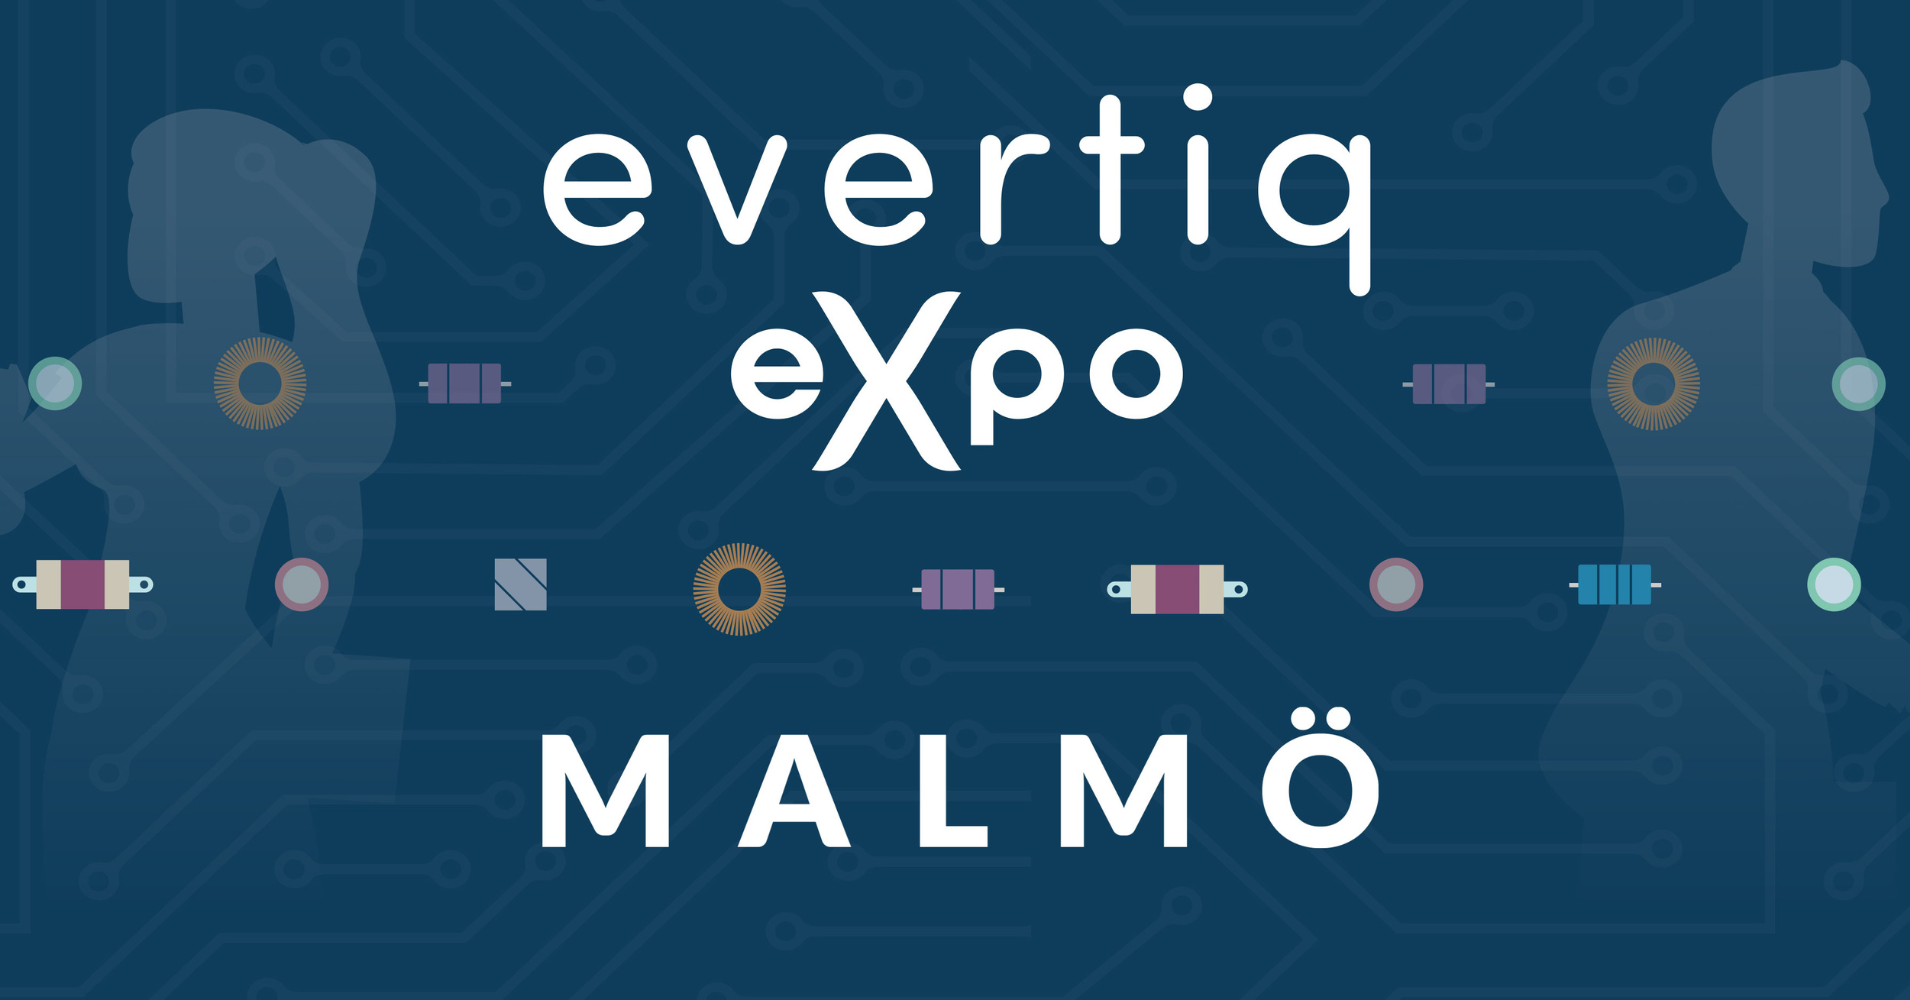 JOT Automation to exhibit at the Evertiq Malmö Exhibition